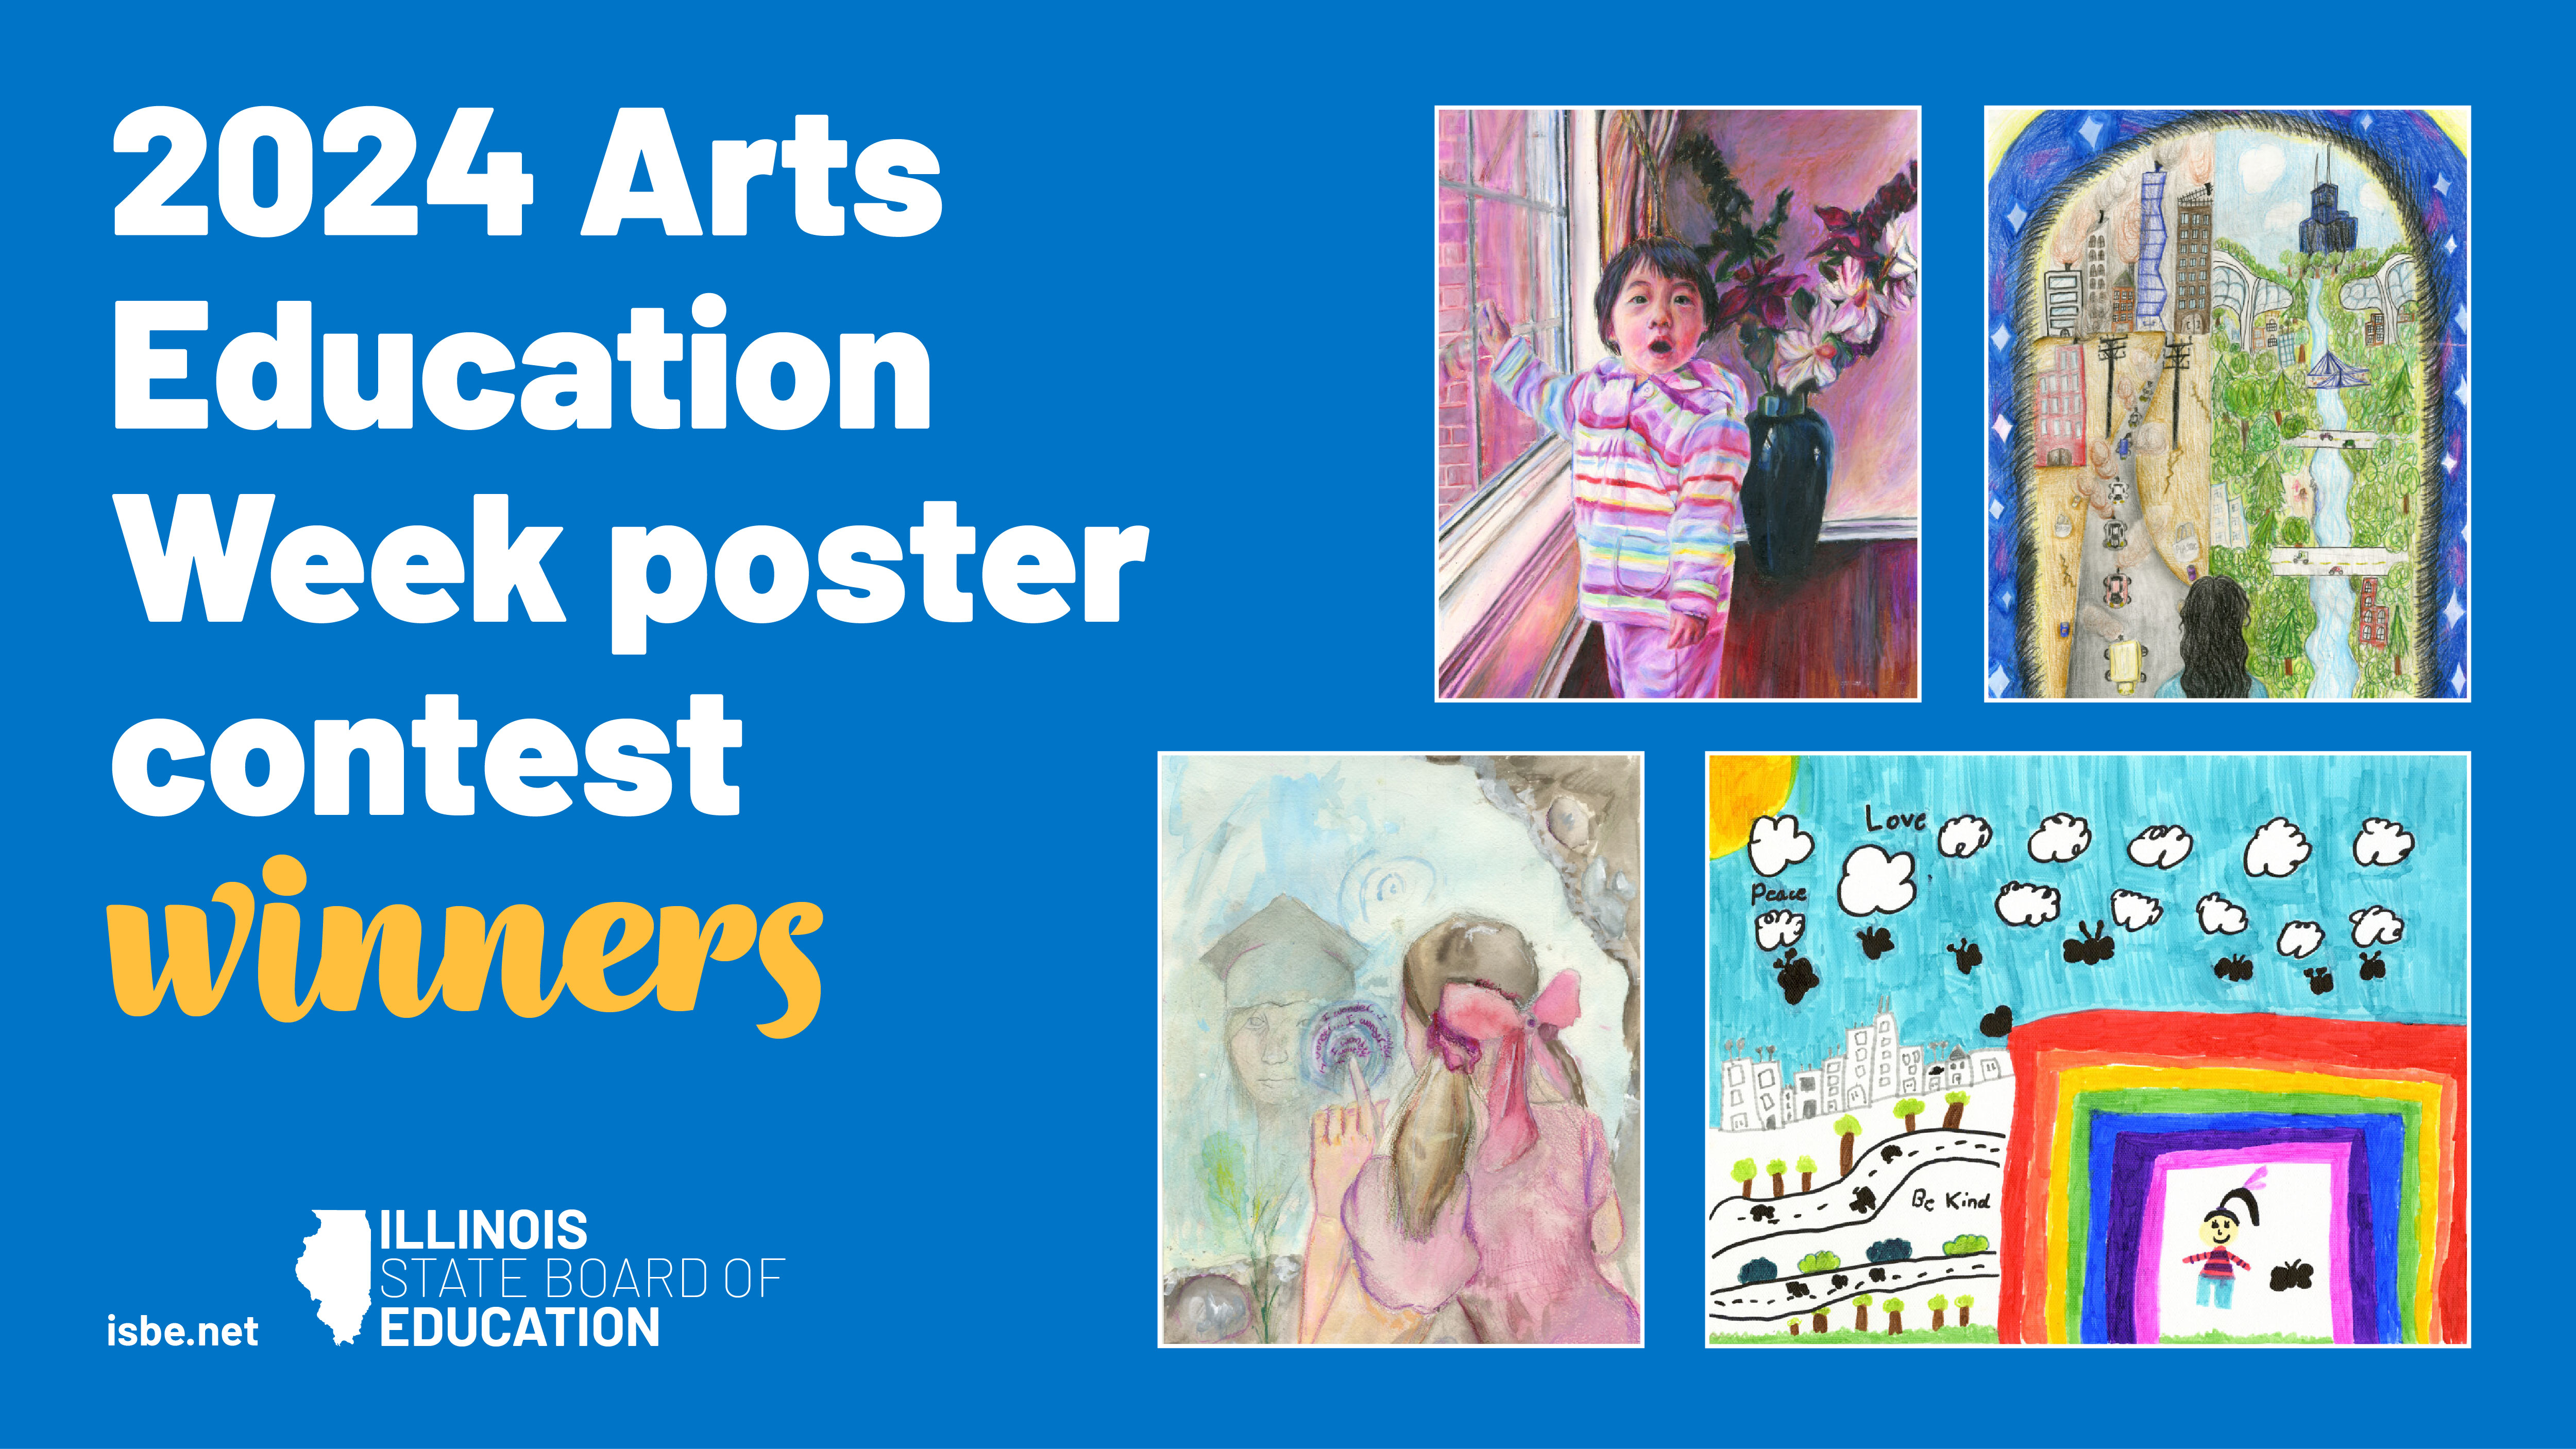 2024 Arts Education Week poster contest winners. Images of four winning posters.